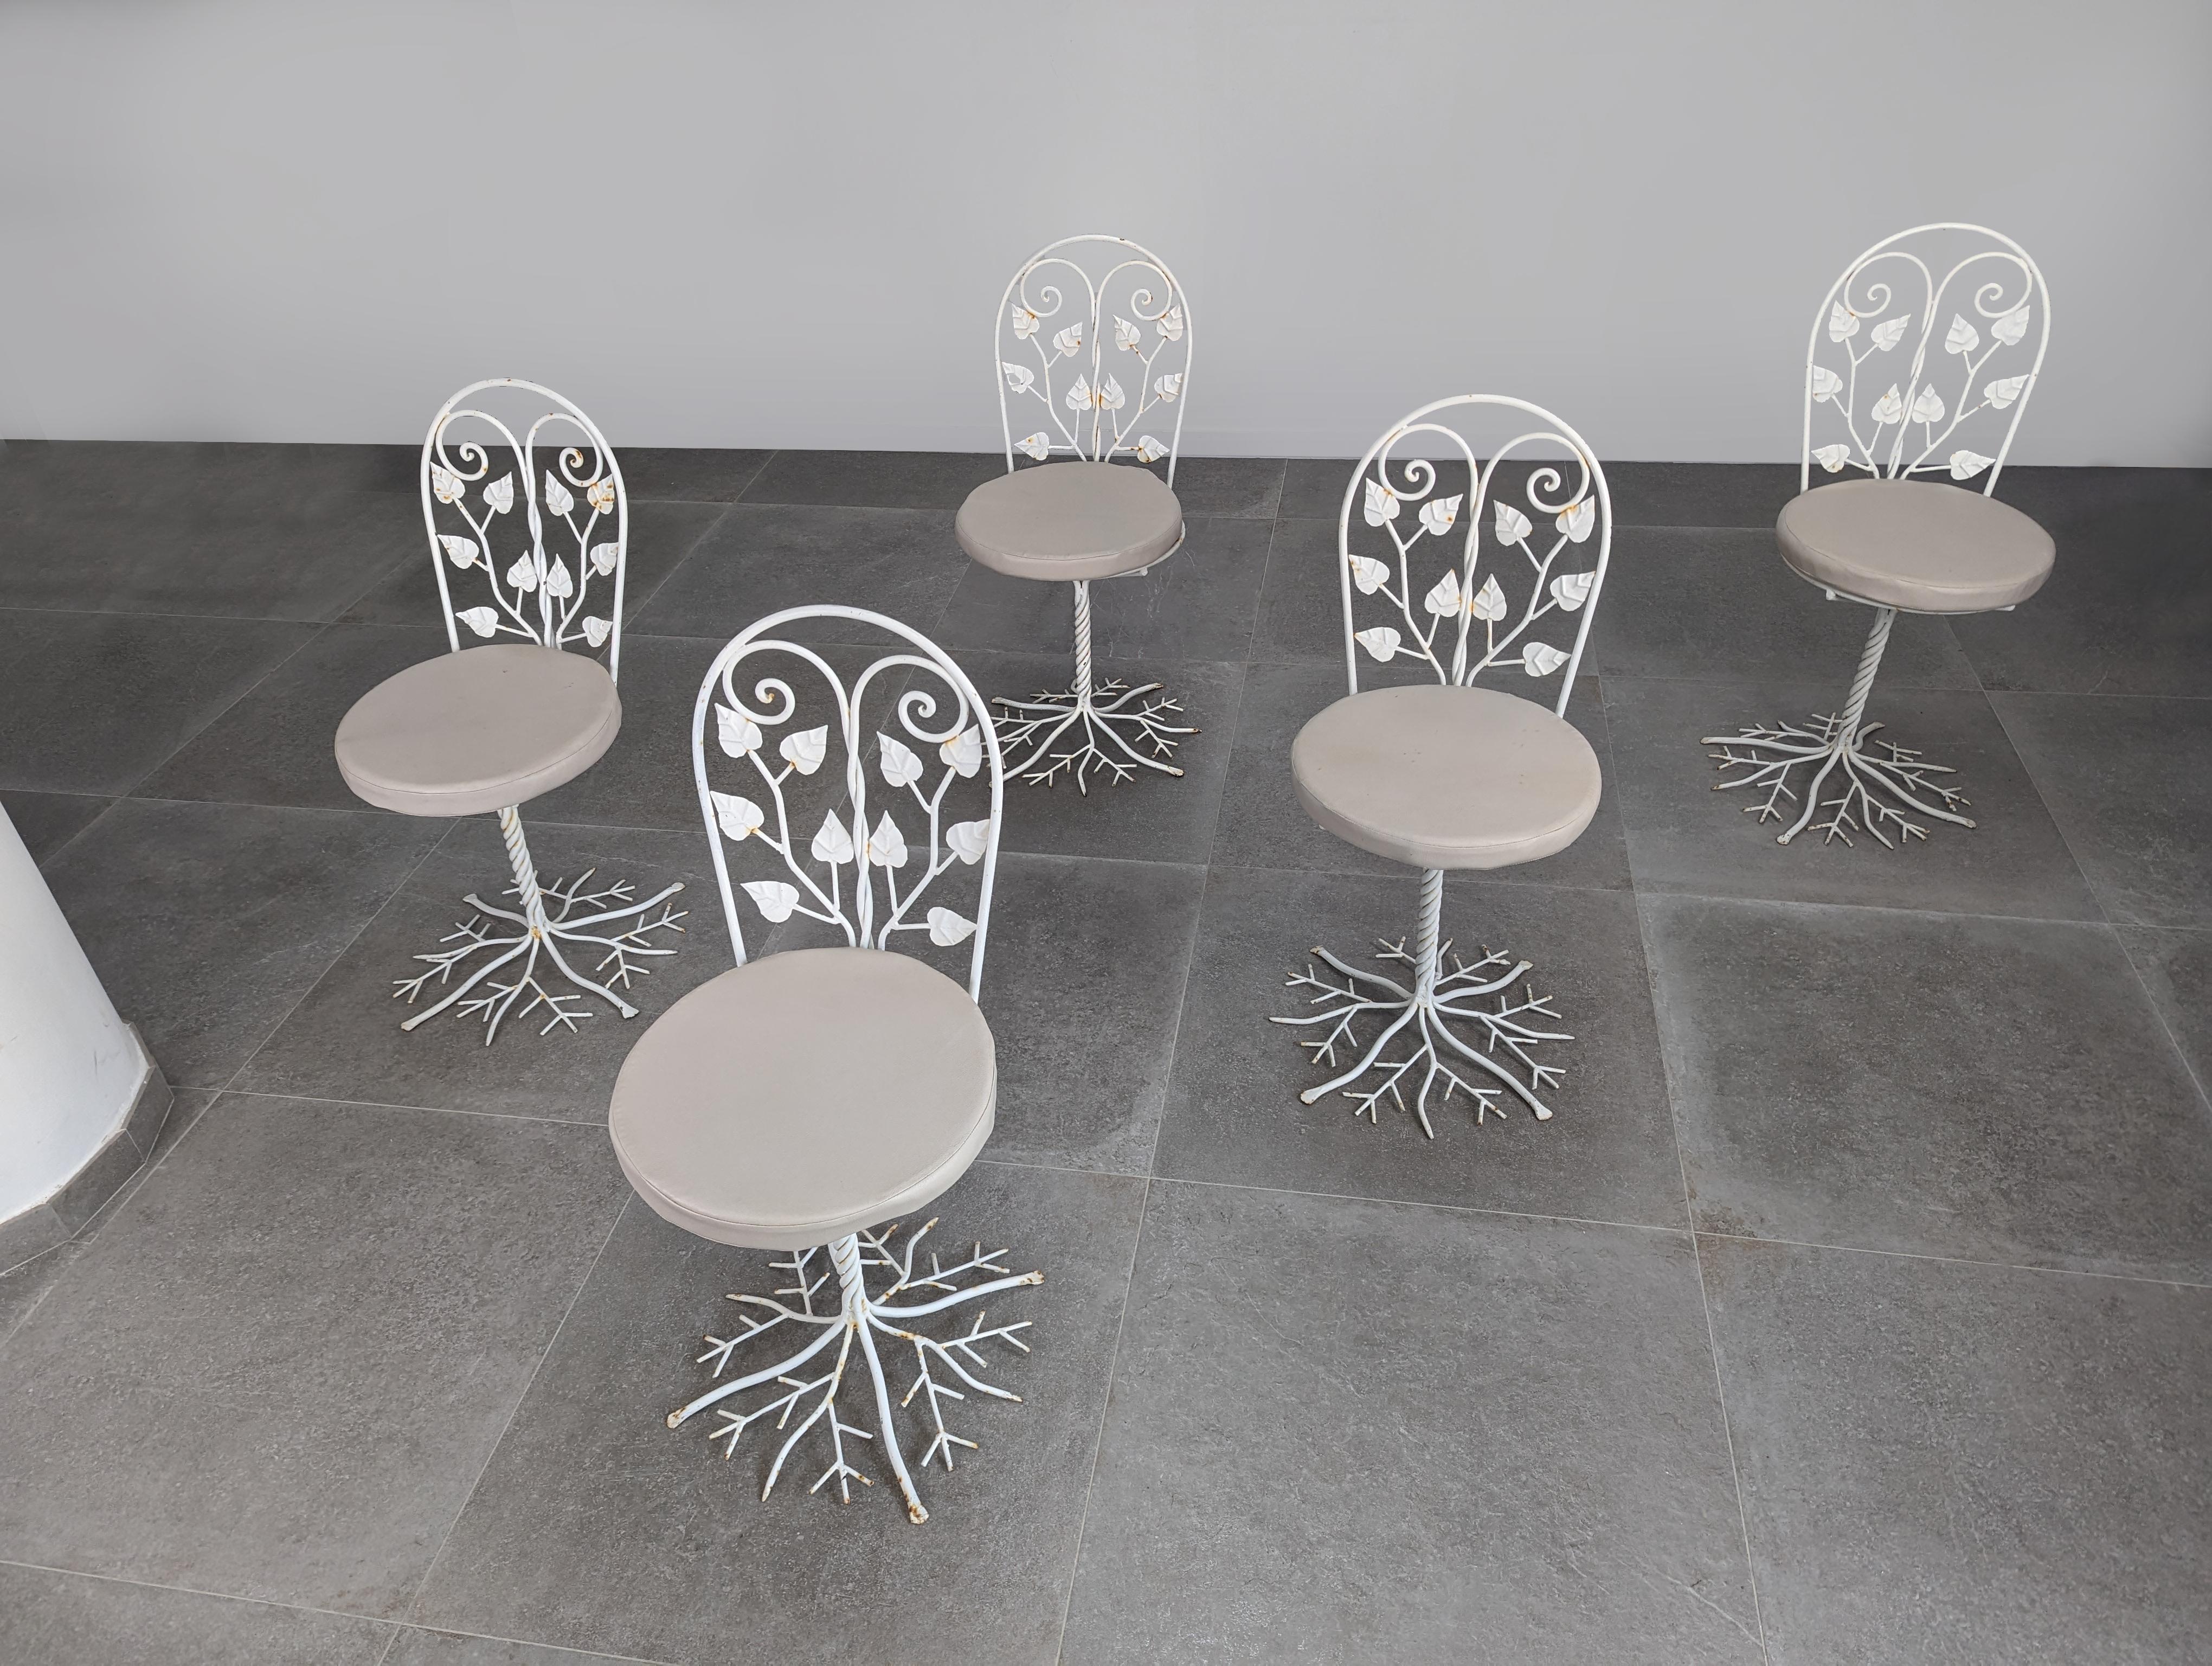 Spectacular wrought iron garden chairs, authentic sculptural works of art from the 1950s. Their unique design represents the beauty and craftsmanship of the era, with an intricate spiral trunk rising from the root-shaped base to the seat and